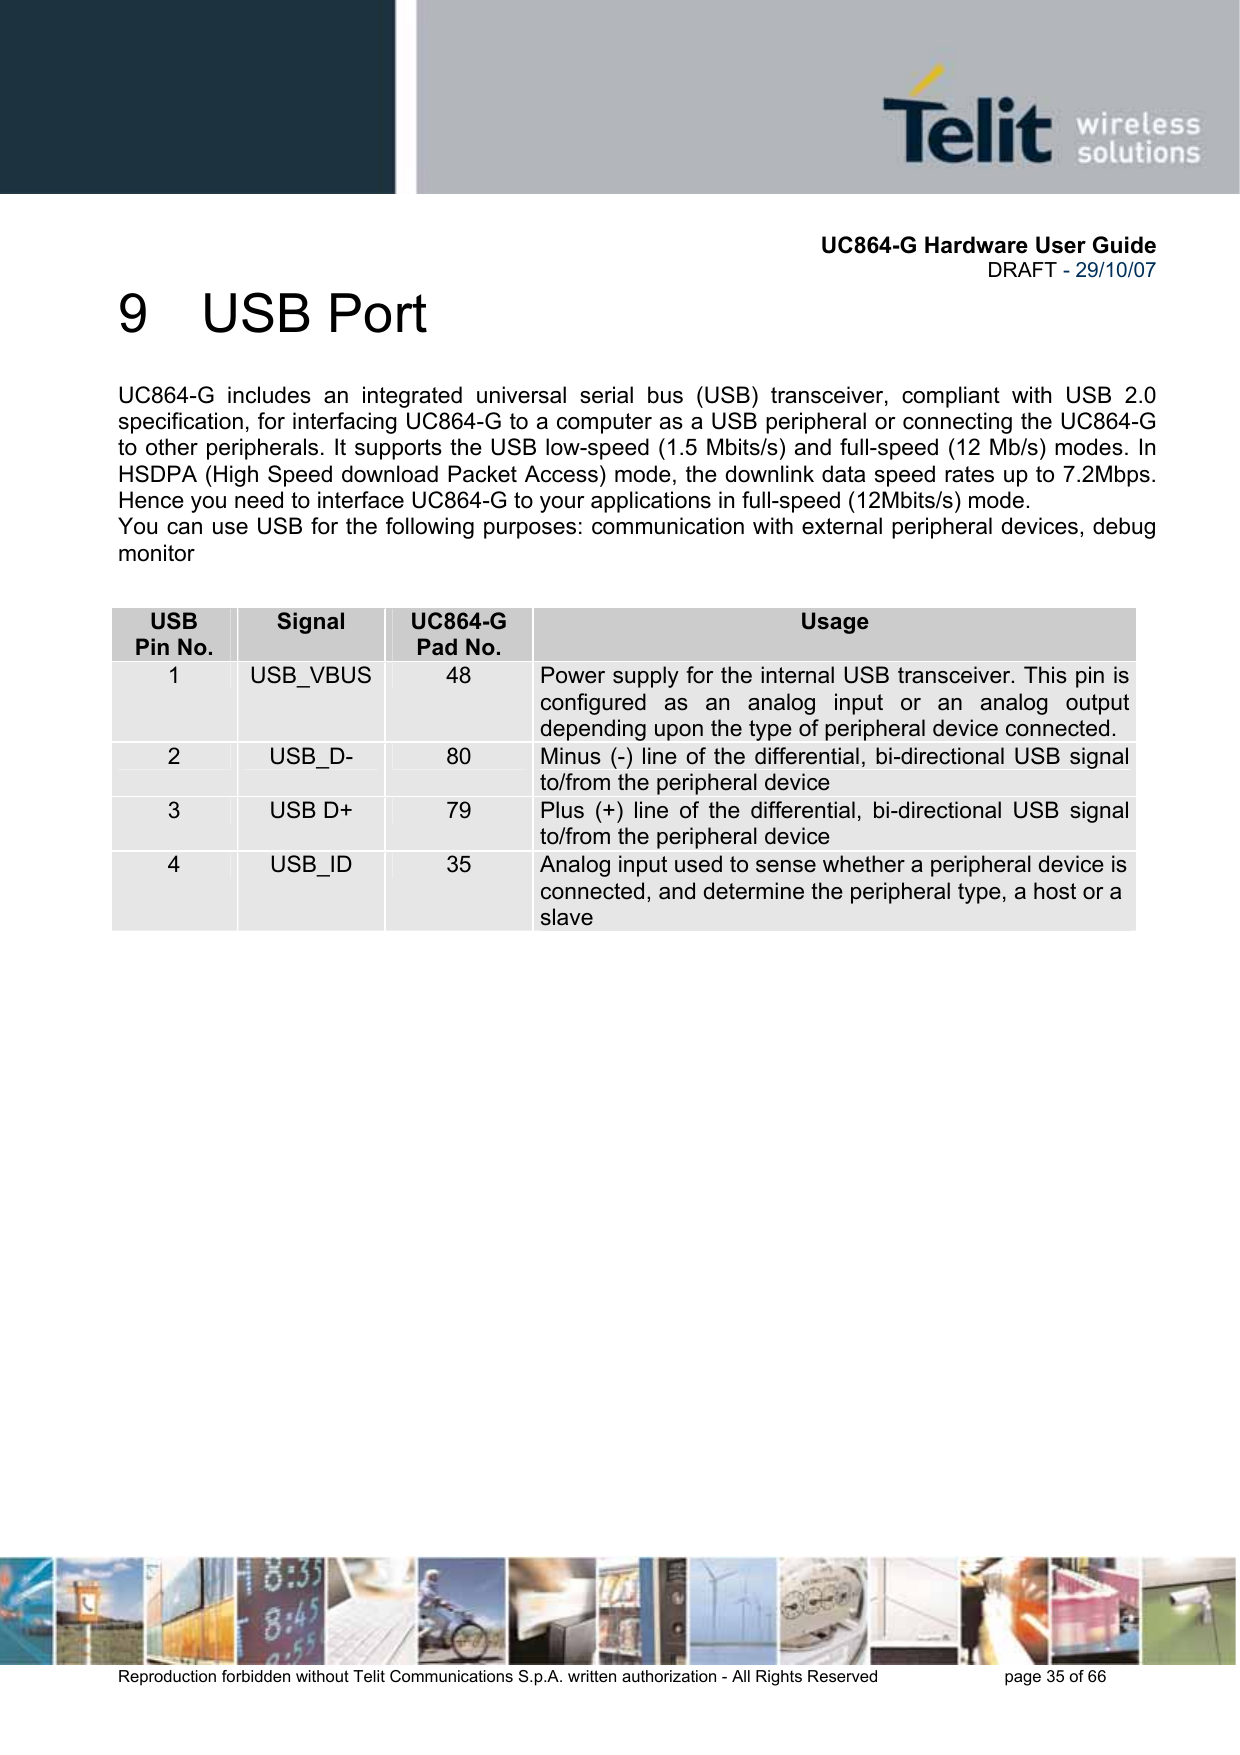       UC864-G Hardware User Guide  DRAFT - 29/10/07      Reproduction forbidden without Telit Communications S.p.A. written authorization - All Rights Reserved    page 35 of 66  9 USB Port UC864-G includes an integrated universal serial bus (USB) transceiver, compliant with USB 2.0 specification, for interfacing UC864-G to a computer as a USB peripheral or connecting the UC864-G to other peripherals. It supports the USB low-speed (1.5 Mbits/s) and full-speed (12 Mb/s) modes. In HSDPA (High Speed download Packet Access) mode, the downlink data speed rates up to 7.2Mbps. Hence you need to interface UC864-G to your applications in full-speed (12Mbits/s) mode. You can use USB for the following purposes: communication with external peripheral devices, debug monitor  USB Pin No. Signal  UC864-G Pad No. Usage 1  USB_VBUS 48  Power supply for the internal USB transceiver. This pin is configured as an analog input or an analog output depending upon the type of peripheral device connected. 2  USB_D-  80  Minus (-) line of the differential, bi-directional USB signal to/from the peripheral device 3  USB D+  79  Plus (+) line of the differential, bi-directional USB signal to/from the peripheral device 4  USB_ID  35  Analog input used to sense whether a peripheral device isconnected, and determine the peripheral type, a host or a slave 